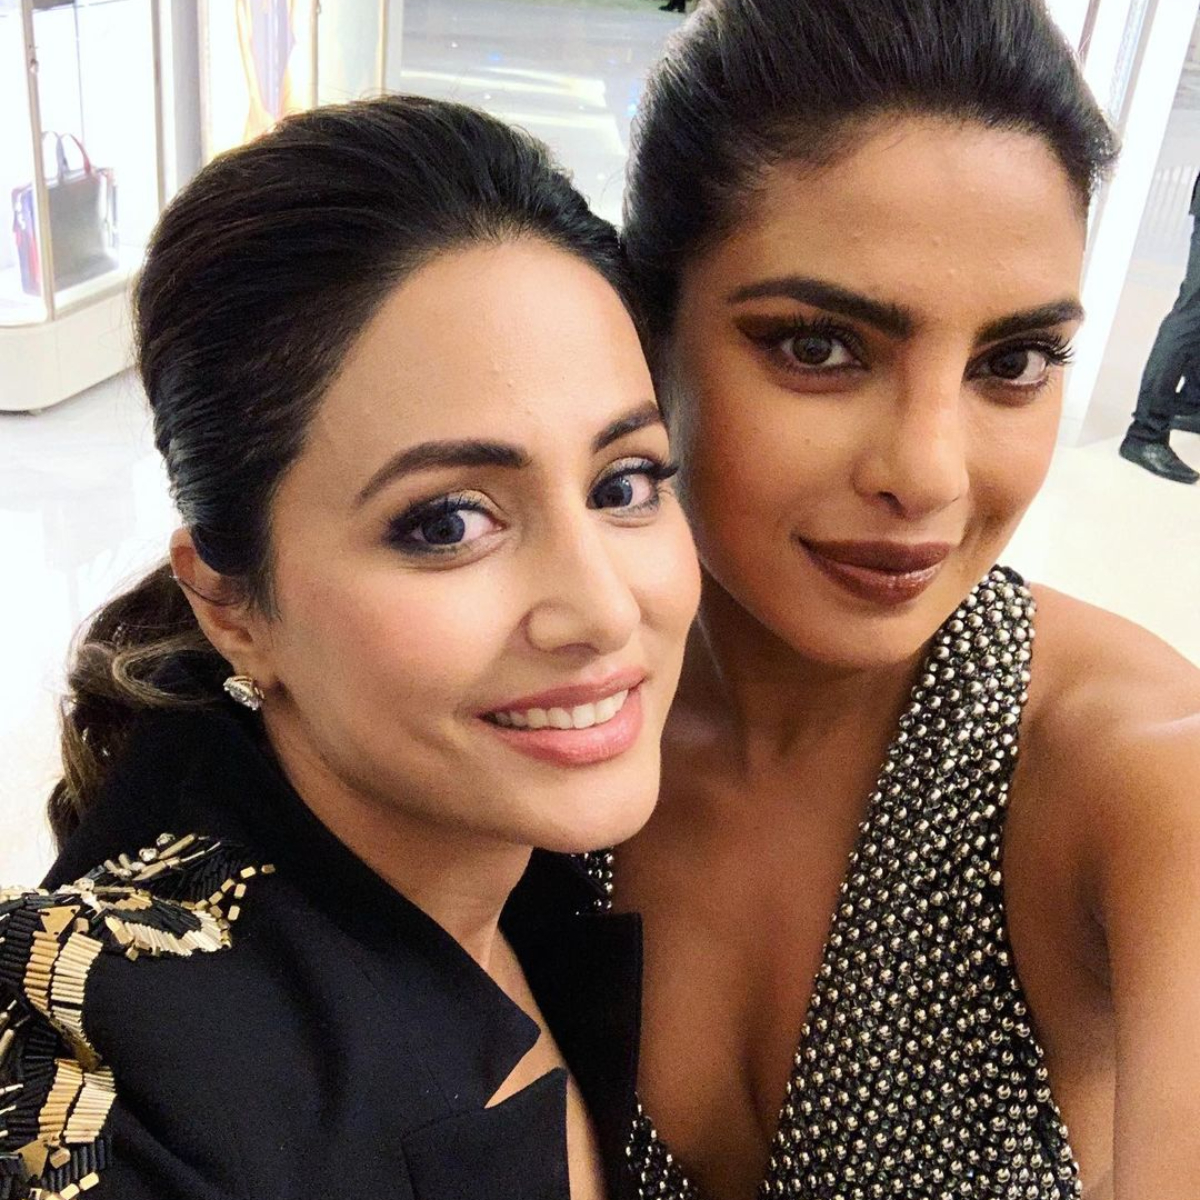 Cannes 2022 EXCLUSIVE: Hina Khan missed Priyanka Chopra at festival; Shares deets of Budapest, Prague vacay